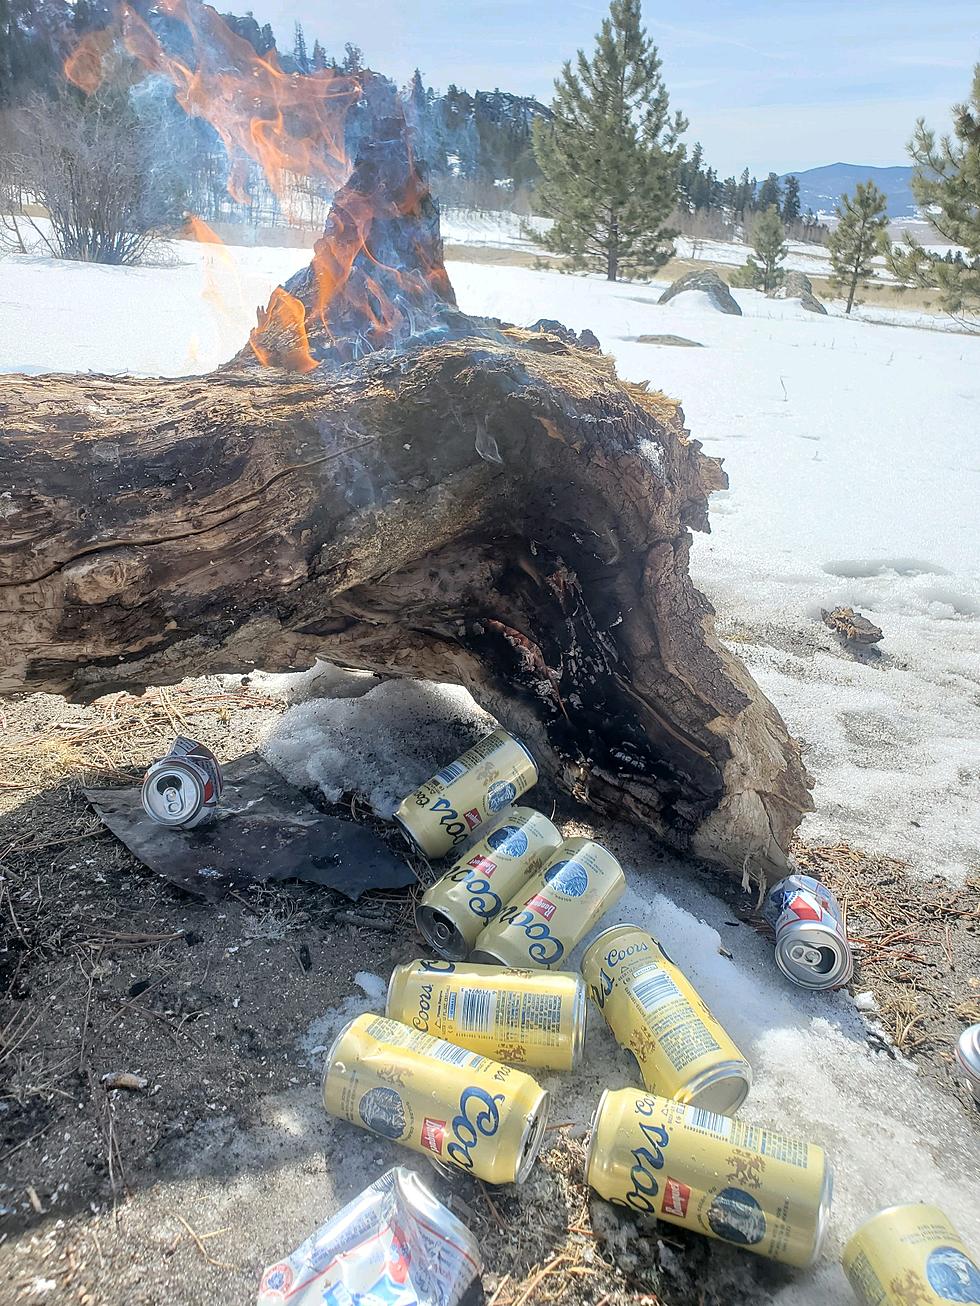 Campers Can Face Jail Time for Unattended Fire in Colorado Park